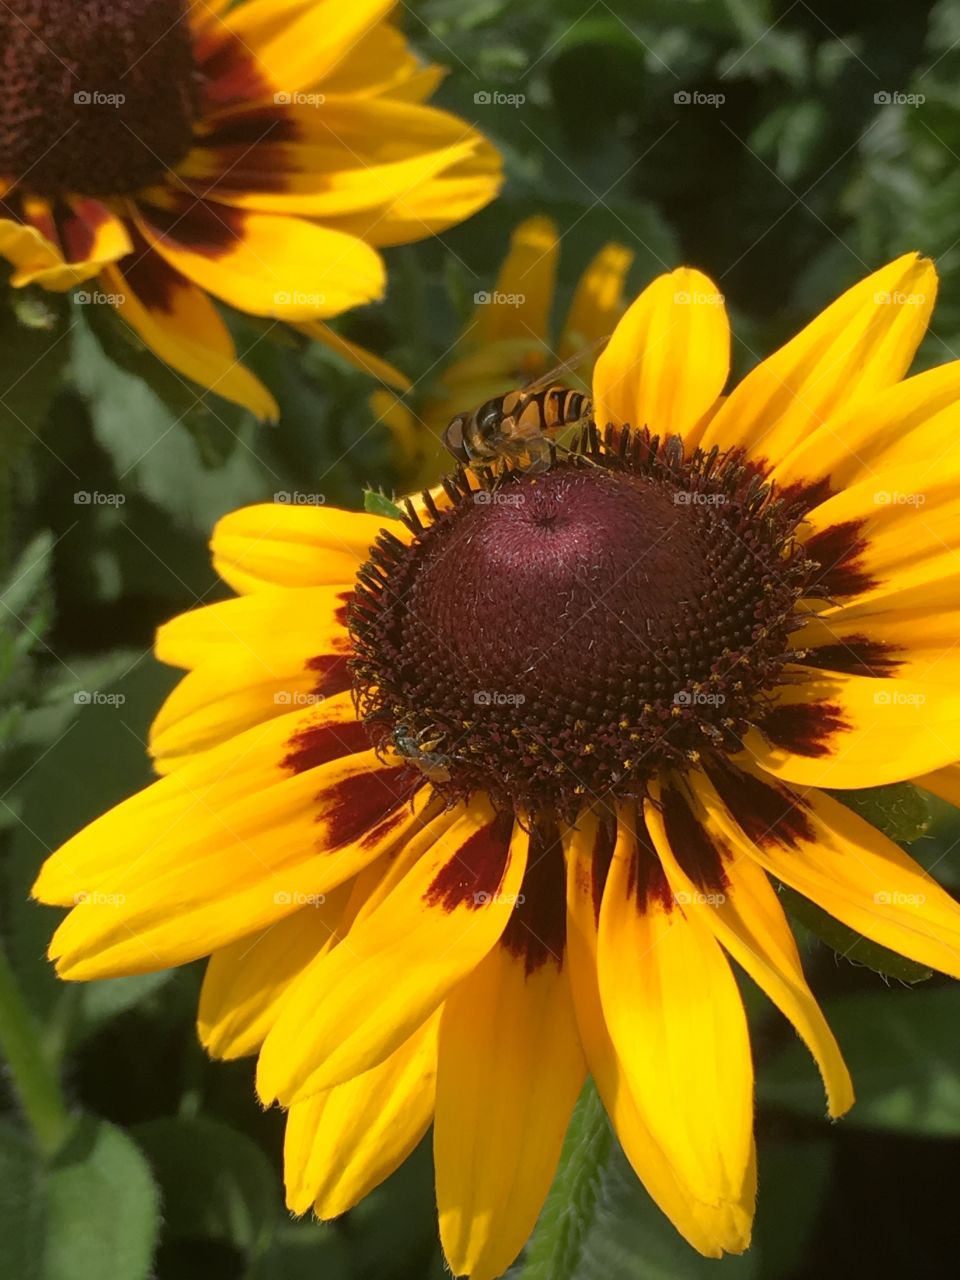 A cute little bee on a sunflower on a beautiful sunny day!